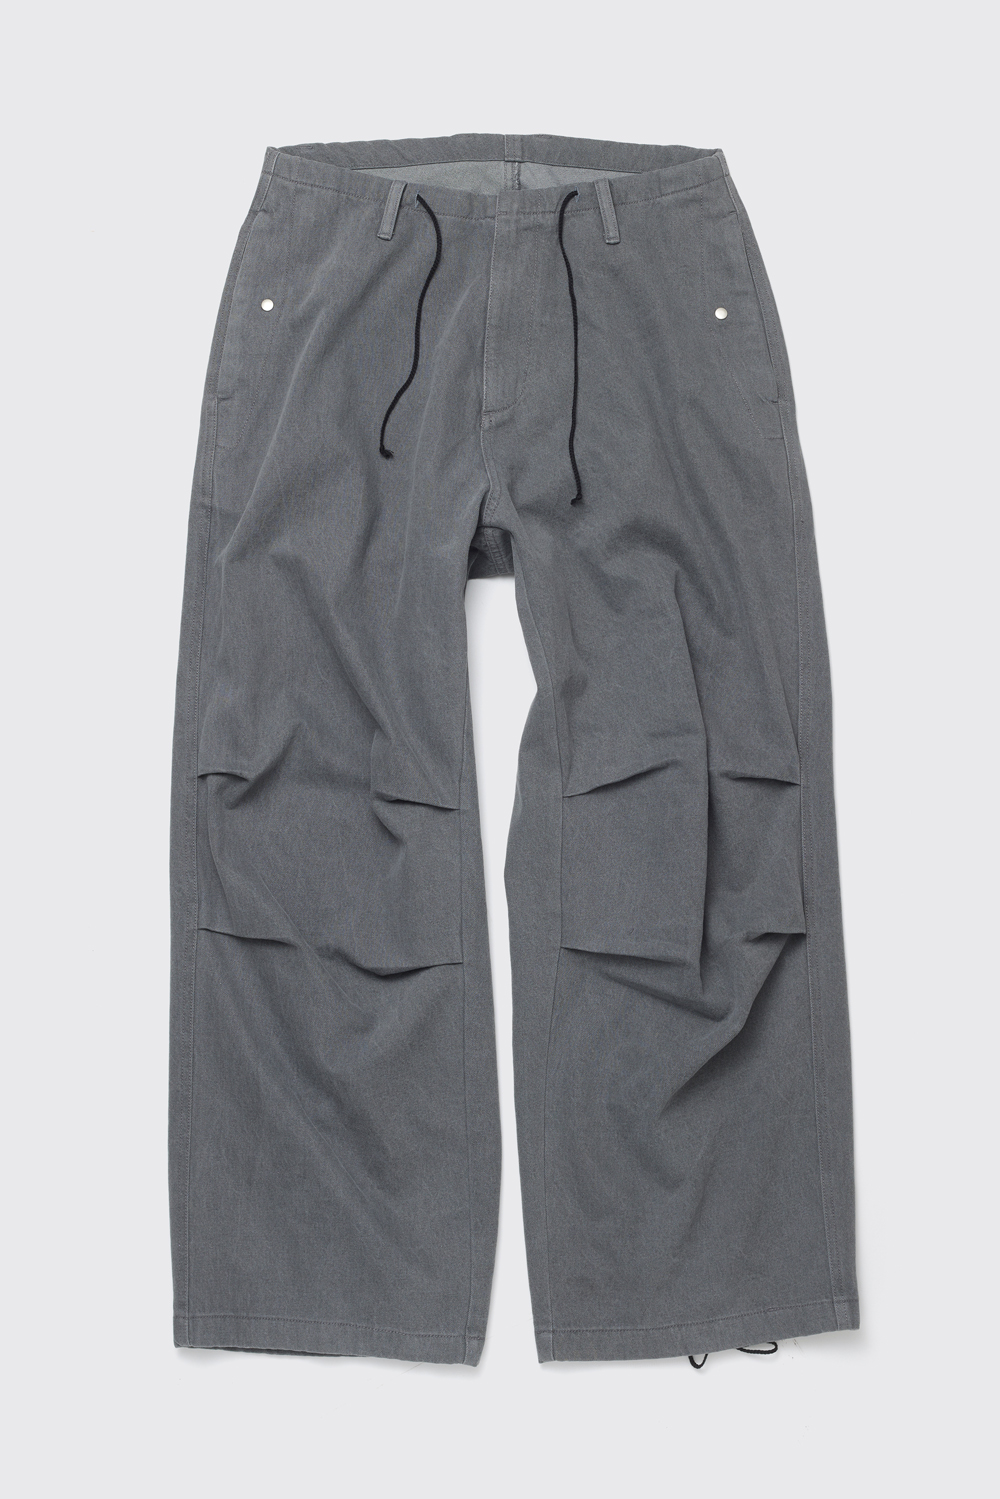 Snow Jeans Washed Grey (2nd Restock)